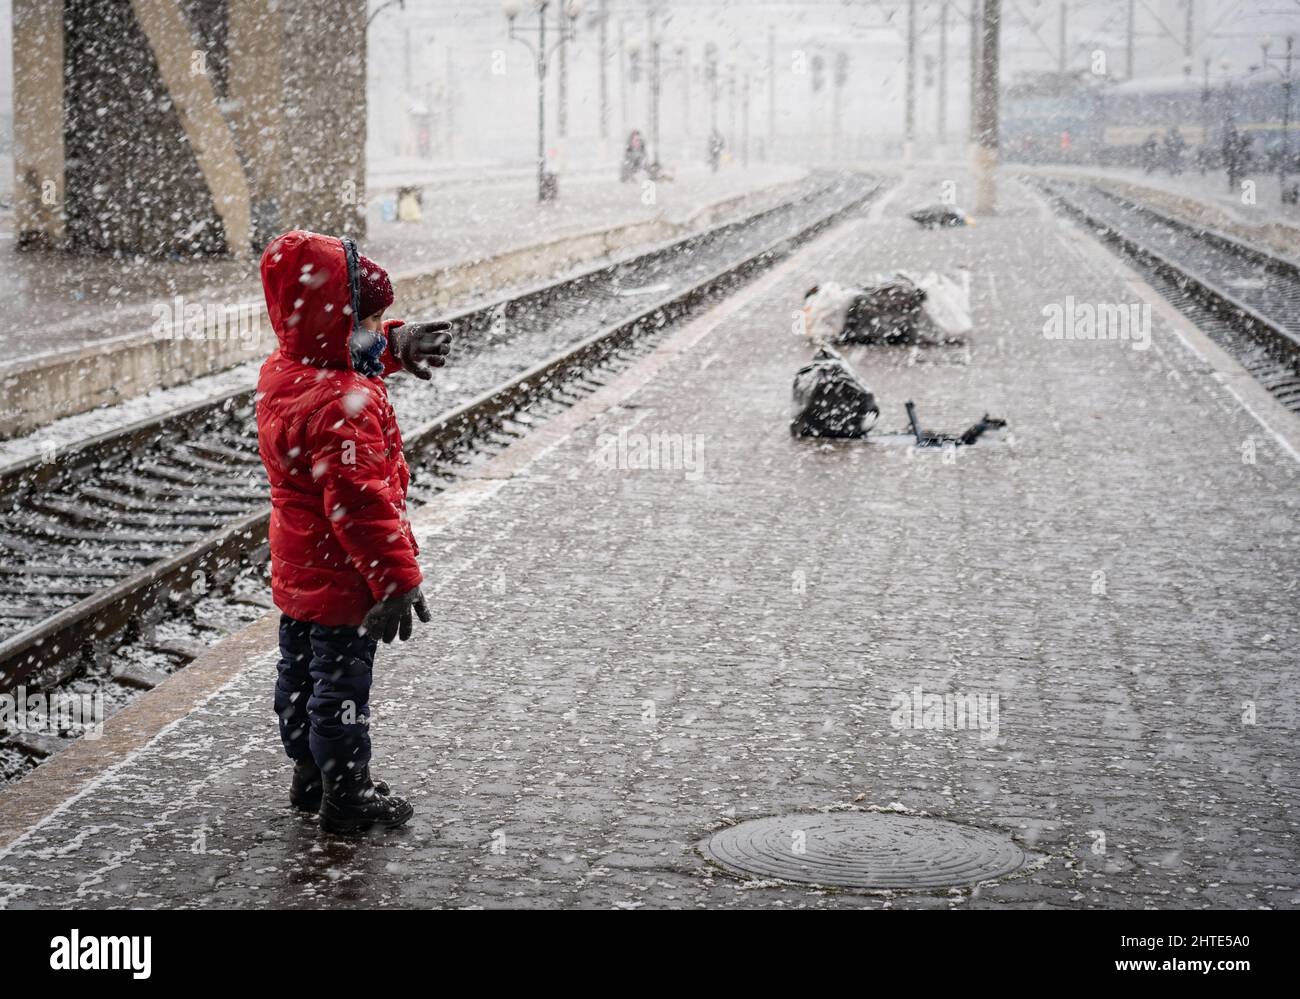 27th February 2022. Lviv Train Station, Ukraine. Temperatures dropped as families wait for a way out of the country. As snow fell on Sunday, some had to turn around and walk back to the nearest main city to find other ways out. - Copyright: Bel Trew/The Credit: Independent/Alamy Live News Stock Photo